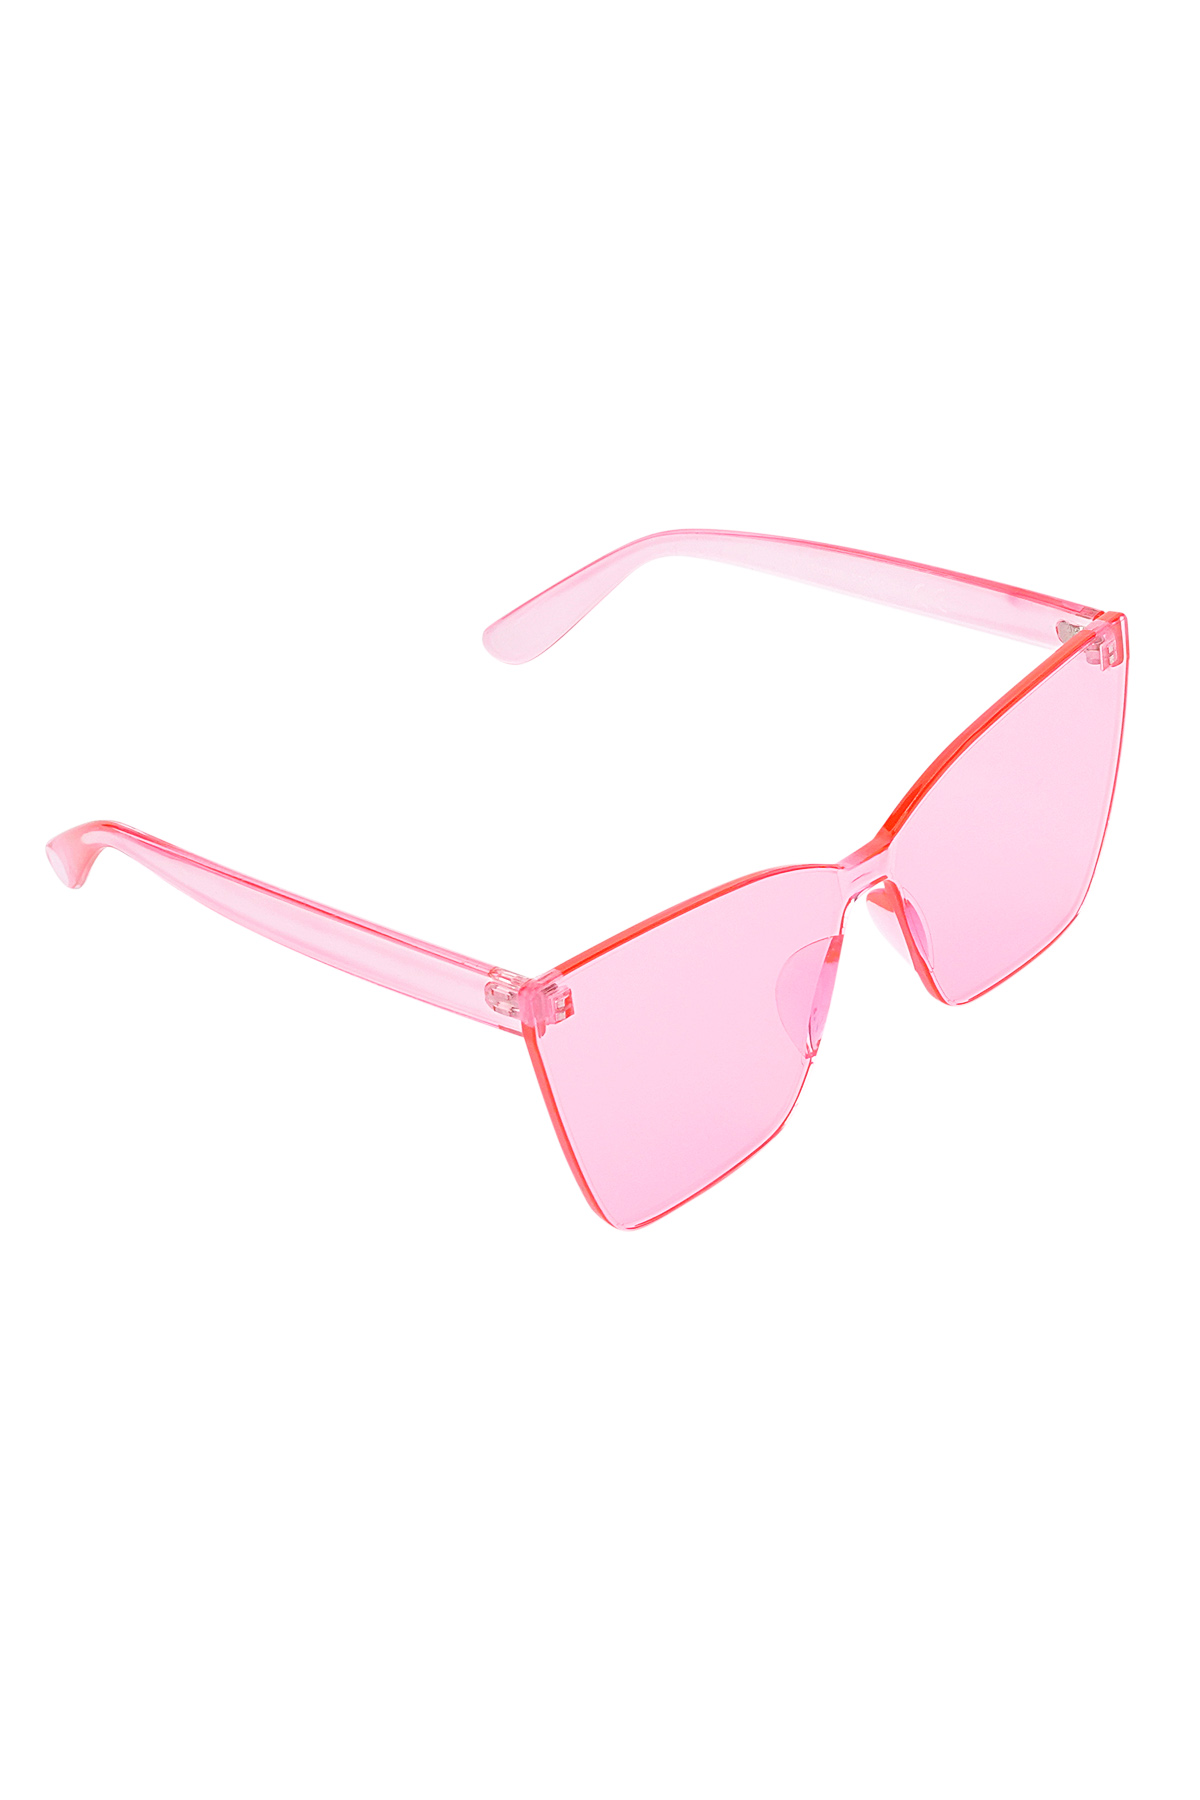 Single-color daily sunglasses - pink